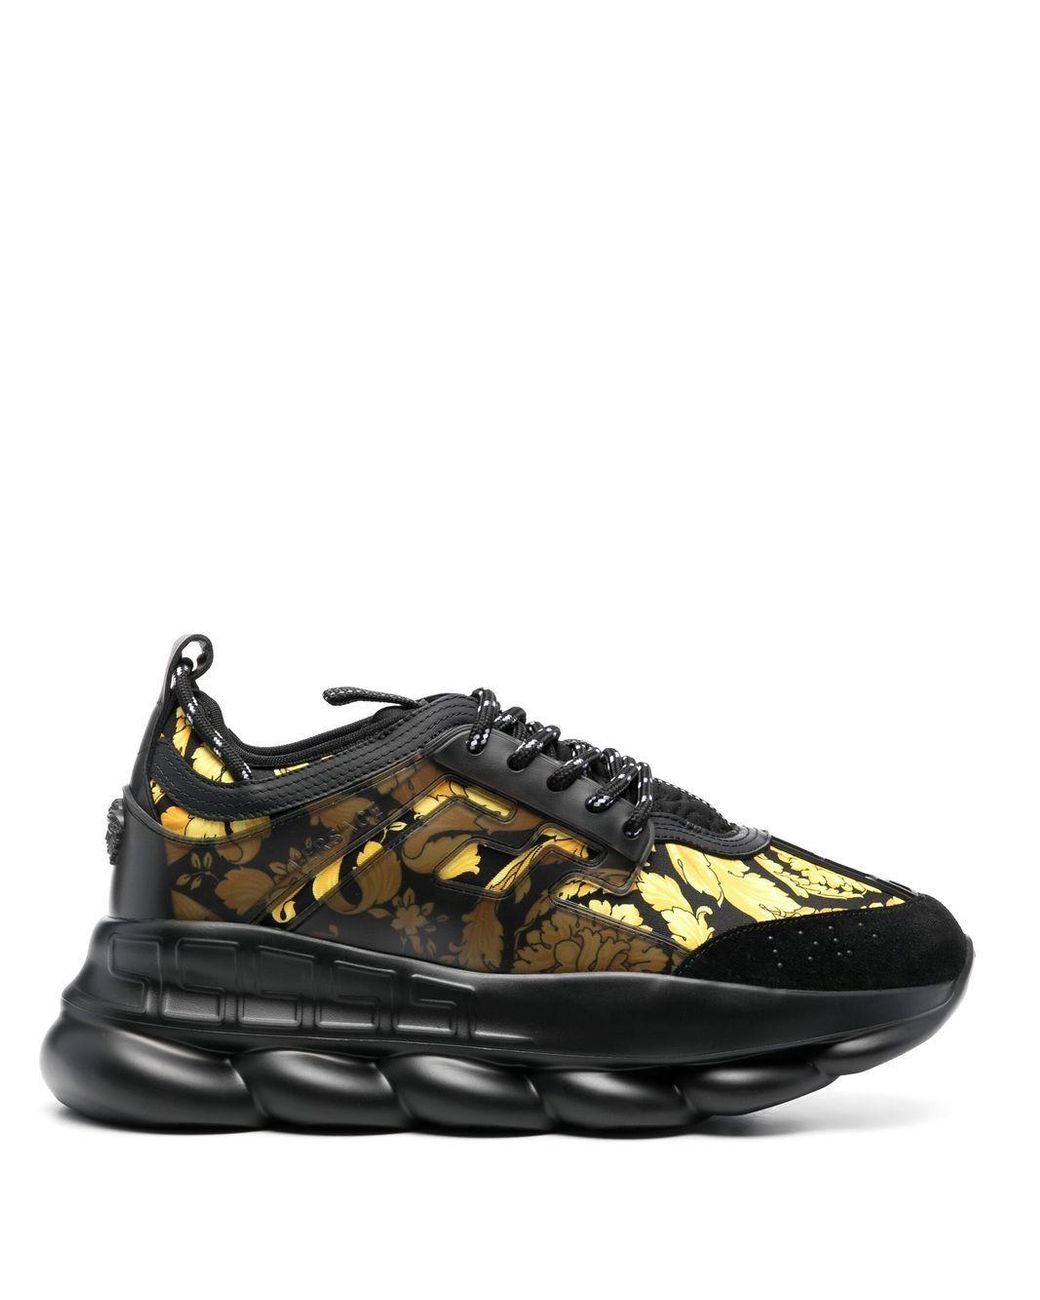 VERSACE CHAIN REACTION BLUE-GREY SNEAKERS – Enzo Clothing Store